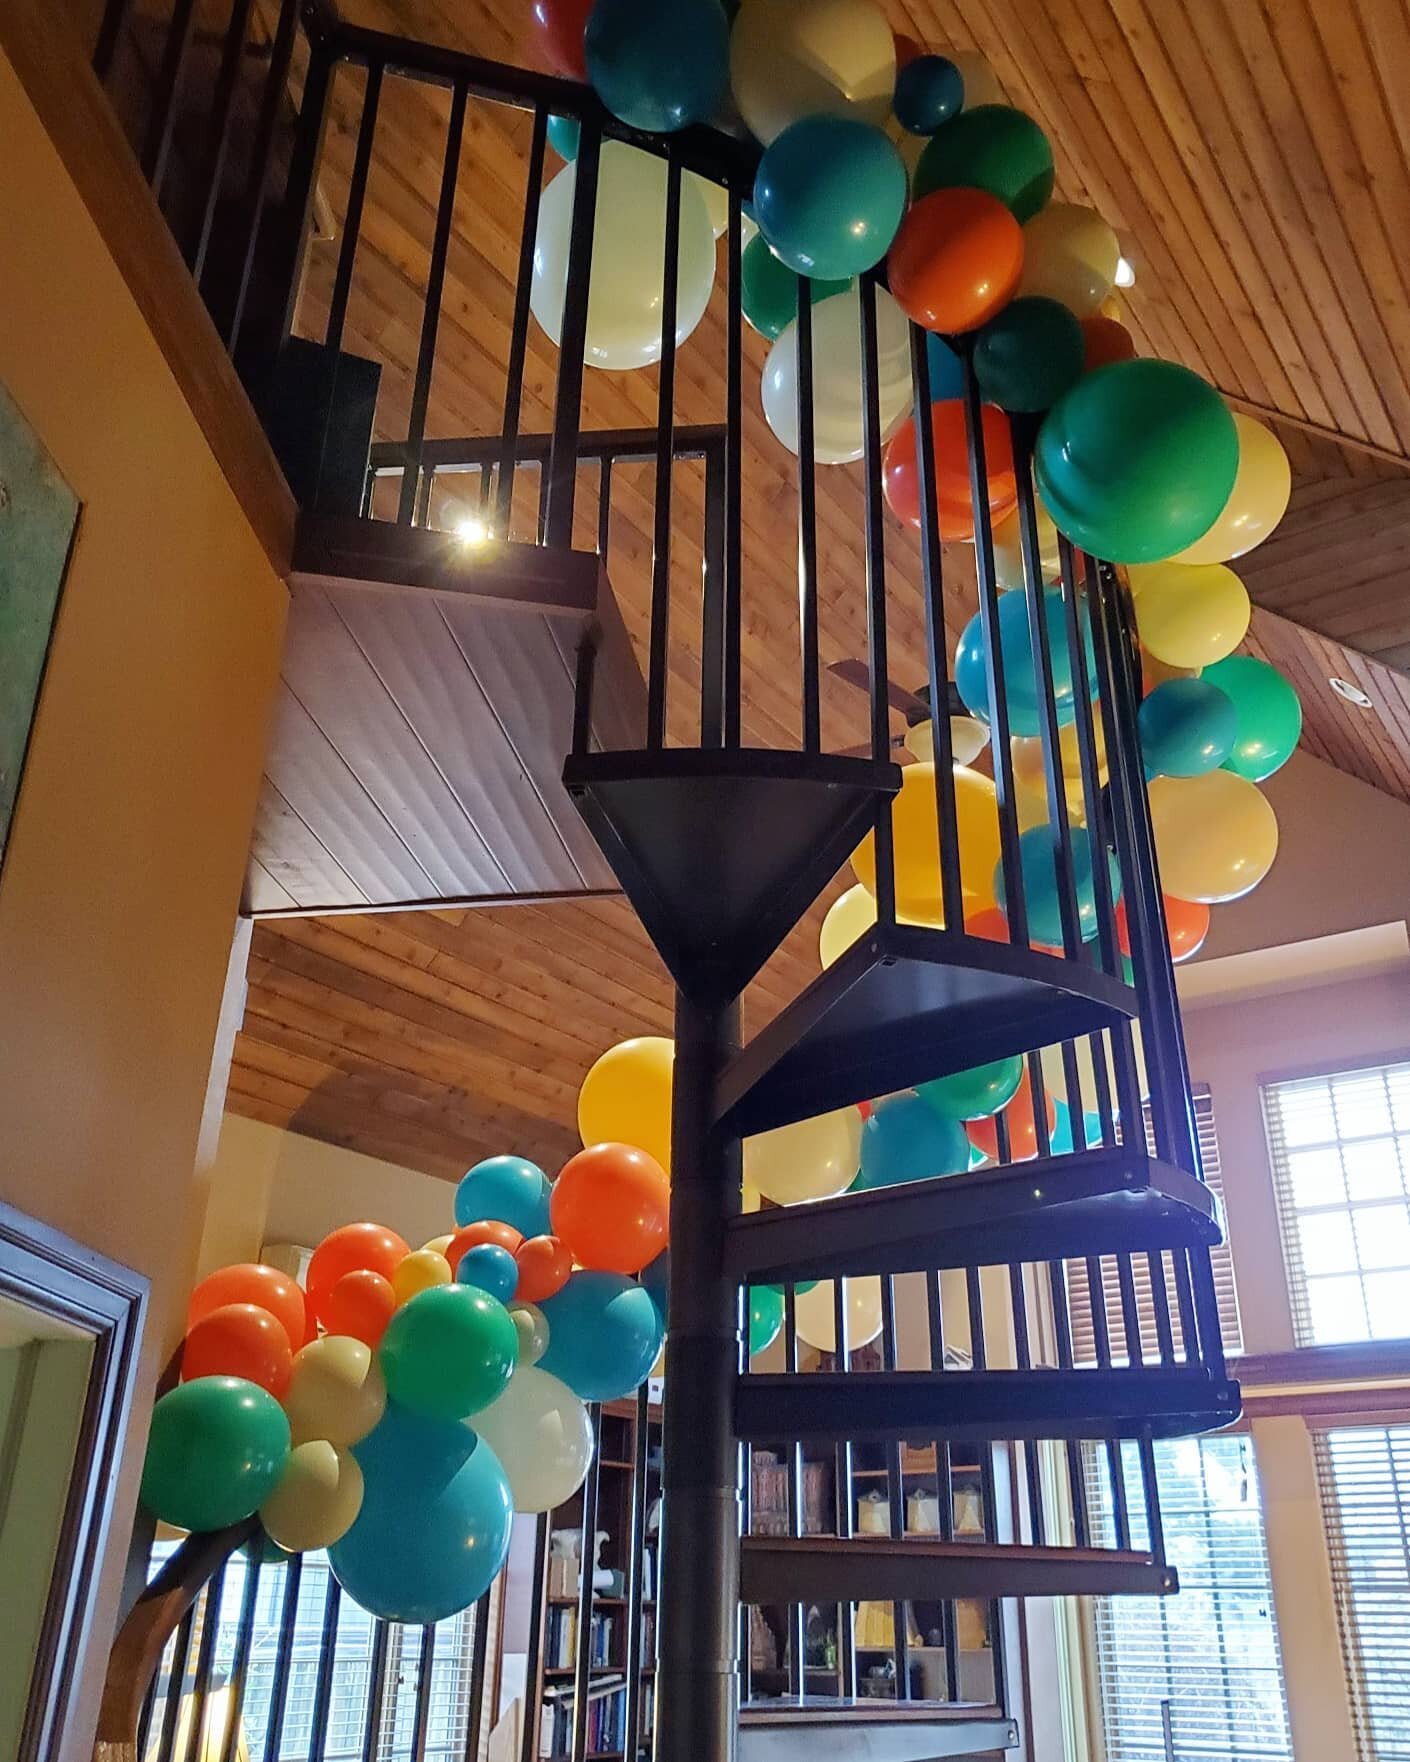 A little balloon magic to help celebrate a 91st birthday today. HAPPY BIRTHDAY DOROTHY!!! 🎈🎂🎉

#balloons #balloonsonbroadway #balloonsportland #balloonspdx #pdxballoons #portlandballoons #balloondecor #decor #creative #balloonfroth #balloongarland